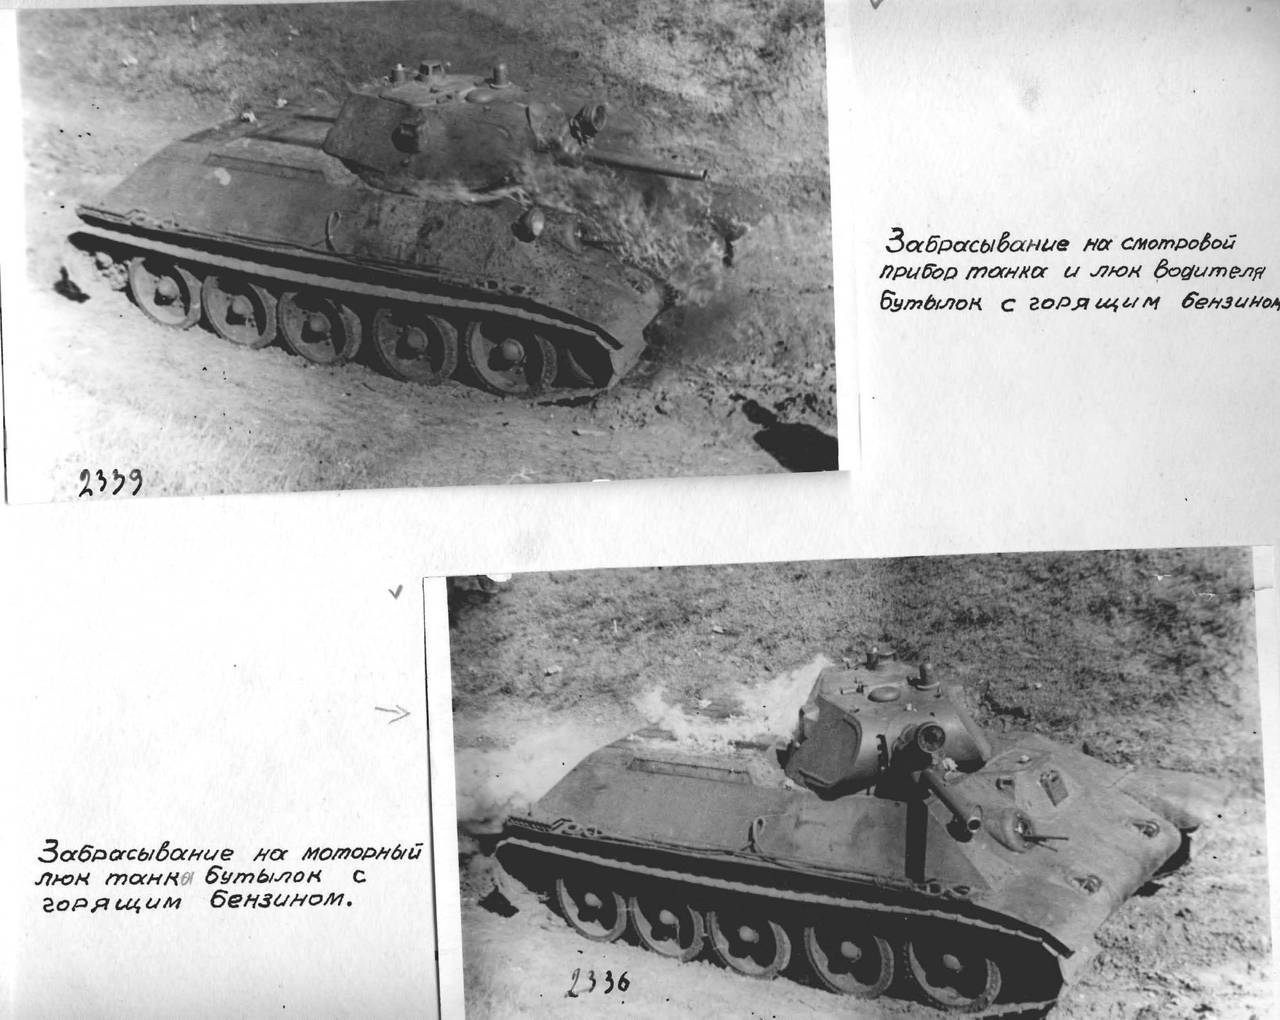 Album of photos and characteristics of the tank T-34, 1940 year